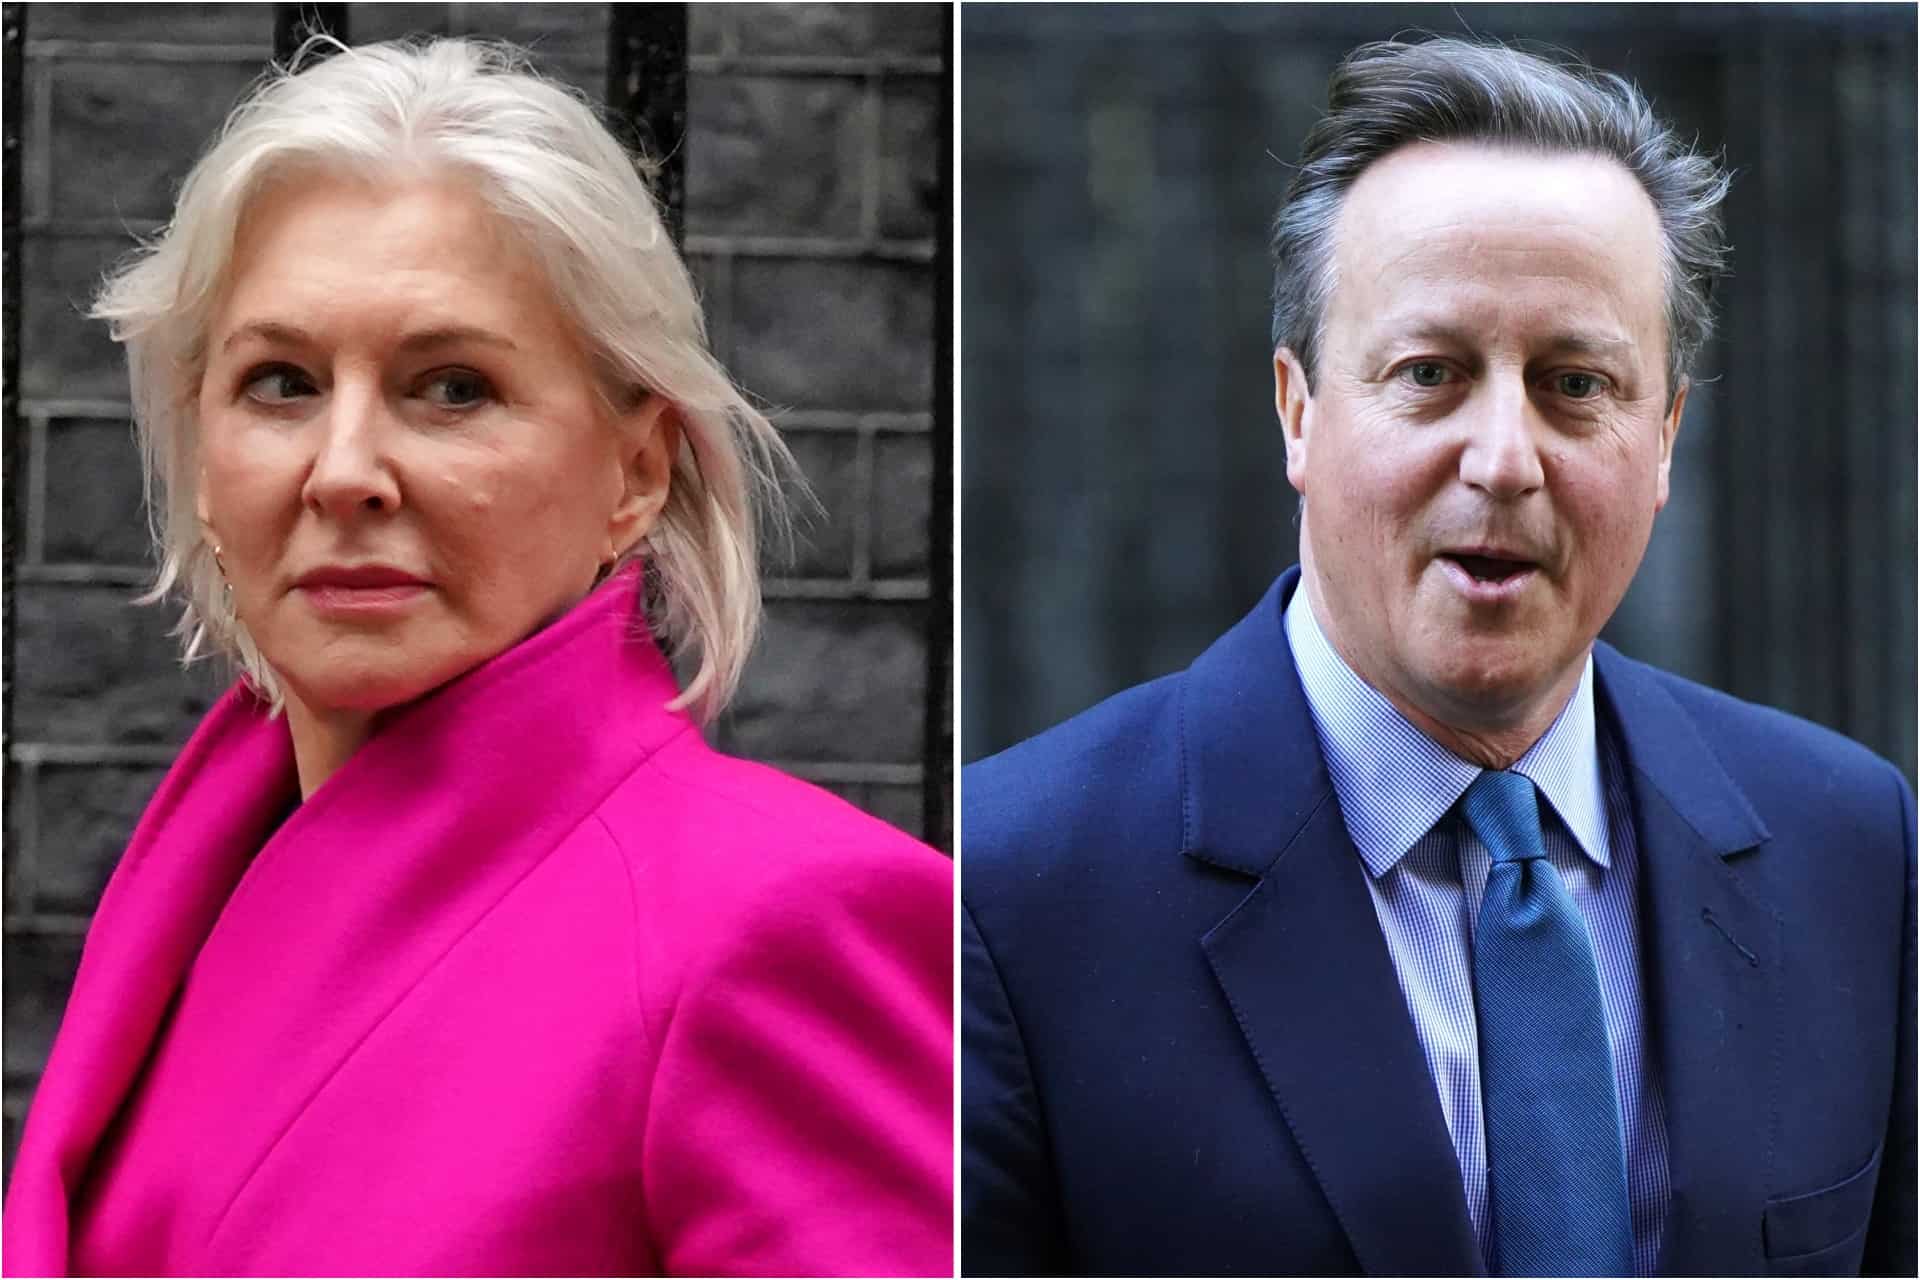 THE PLOT: Dorries says David Cameron will become next Tory Party leader